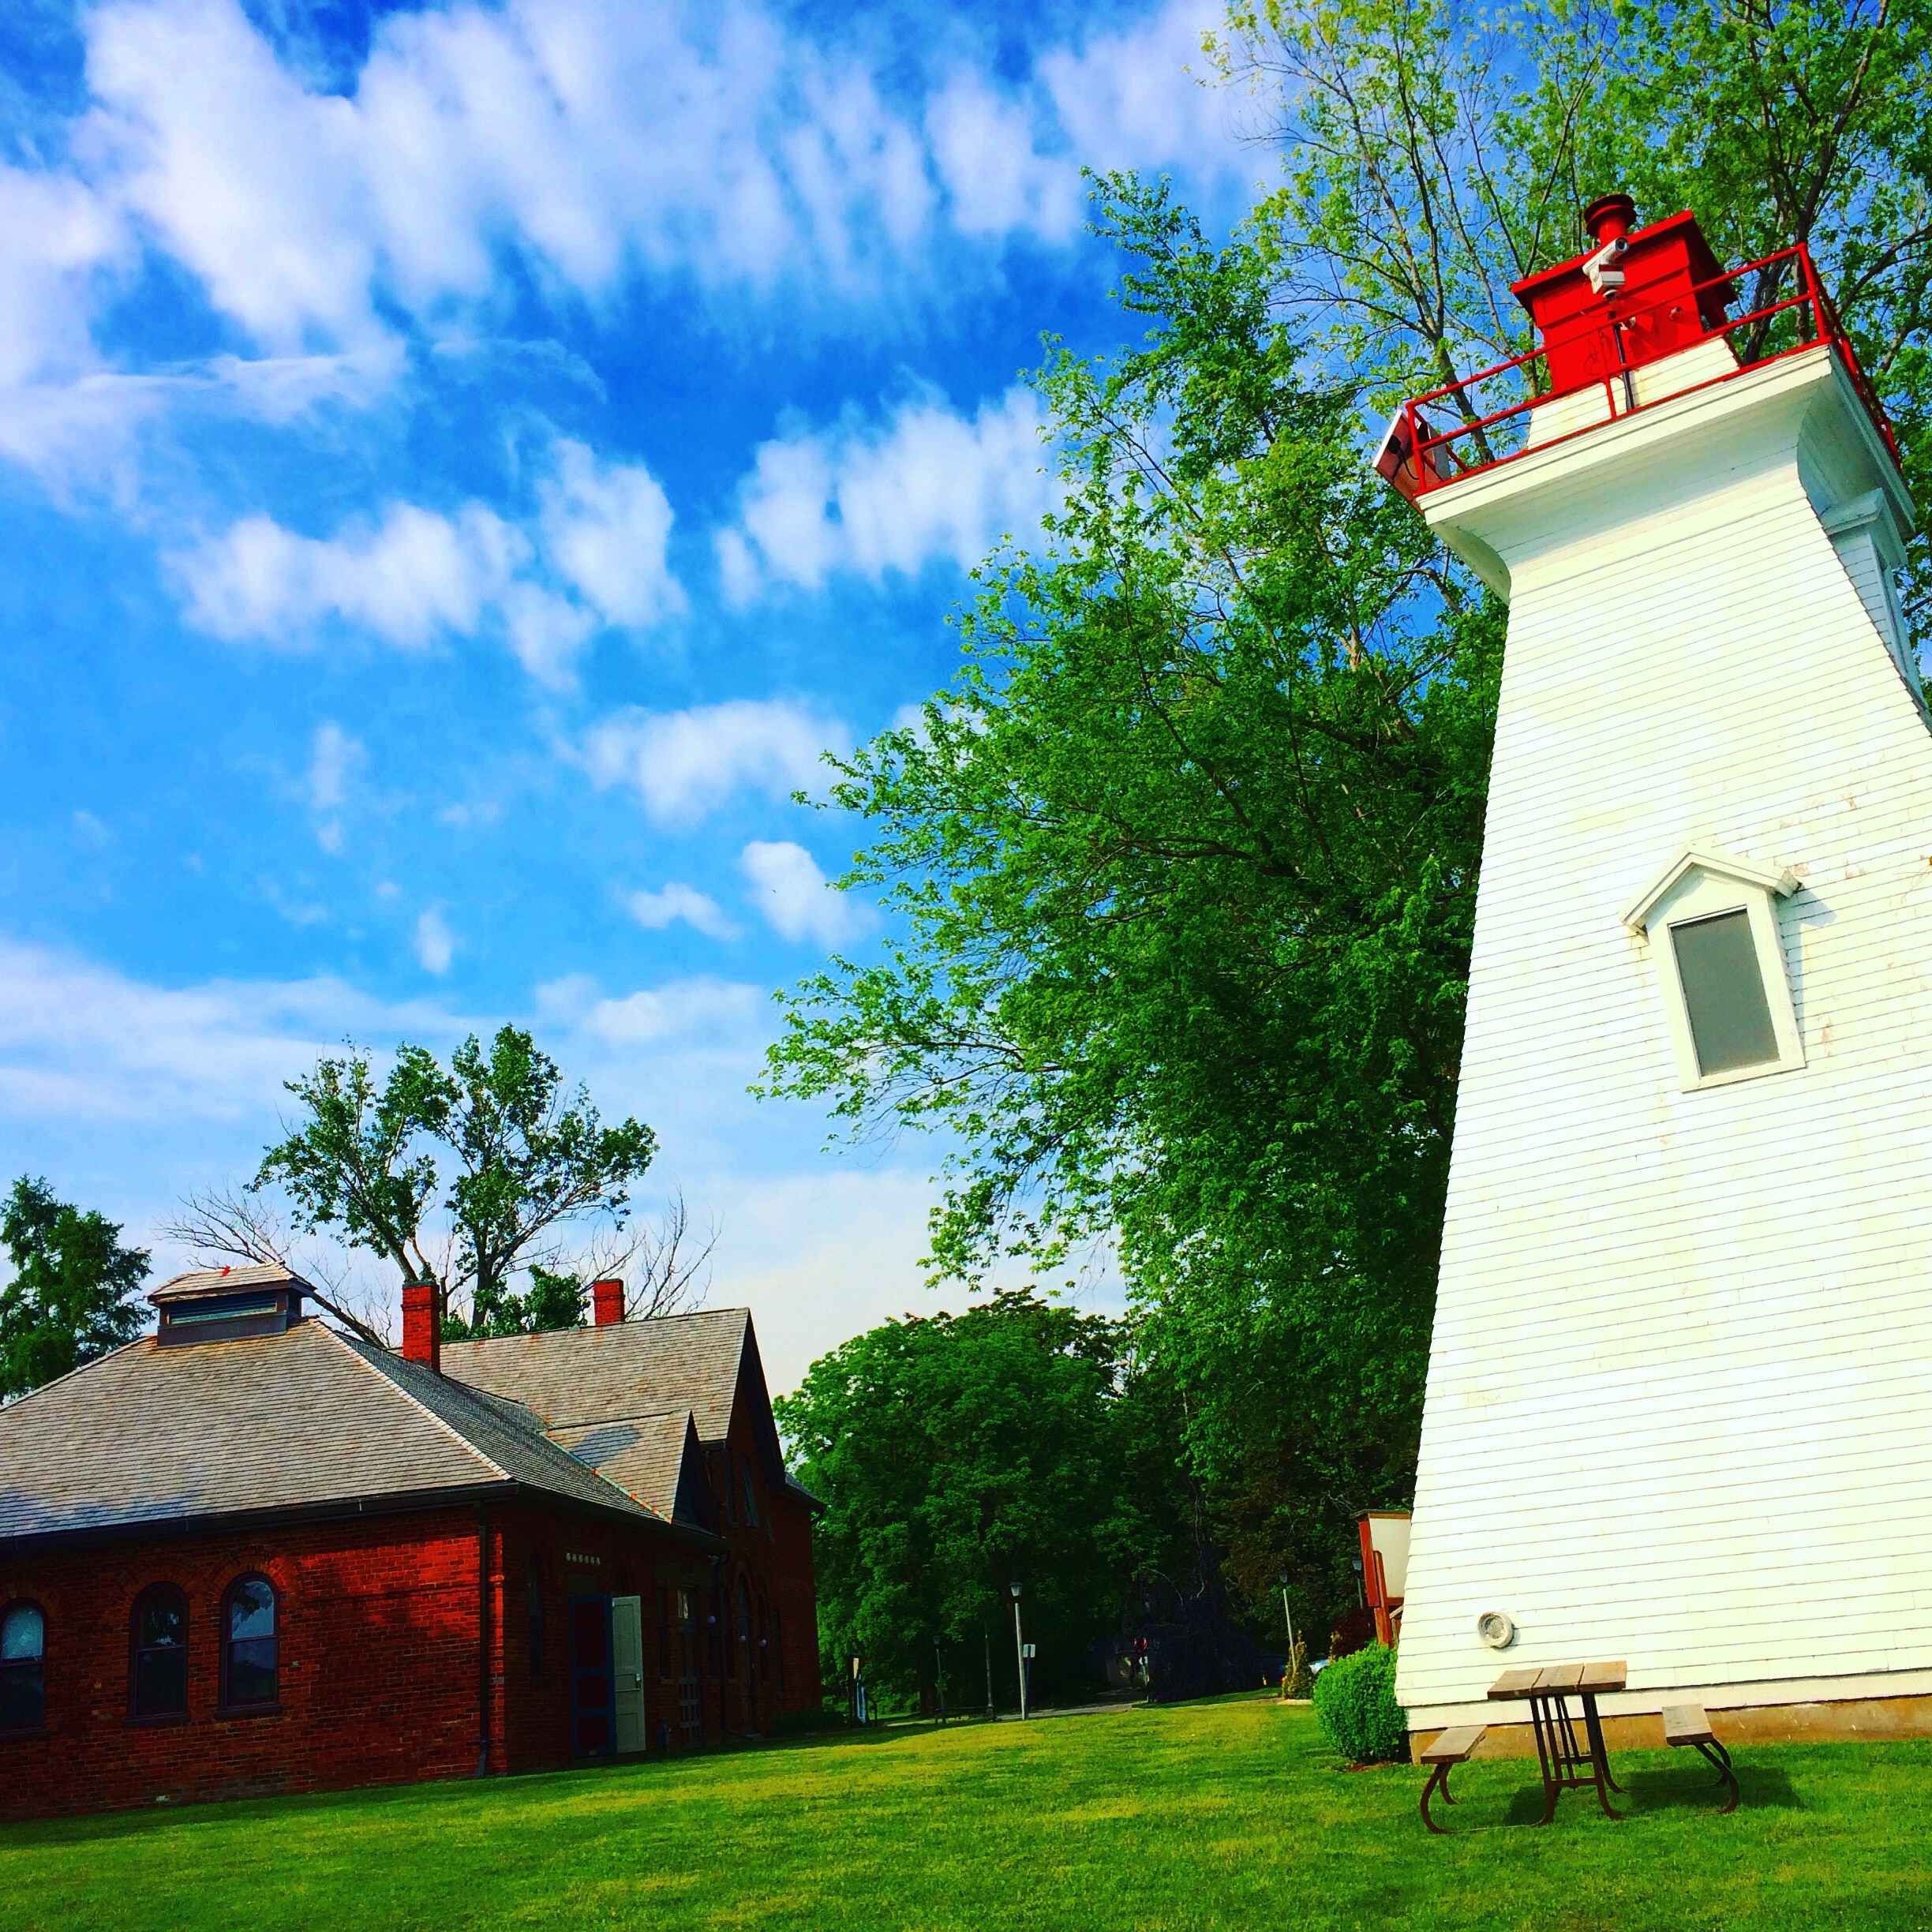 The historic Pumphouse arts centre in Niagara-on-the-Lake... #blue skies and lush #green surroundings